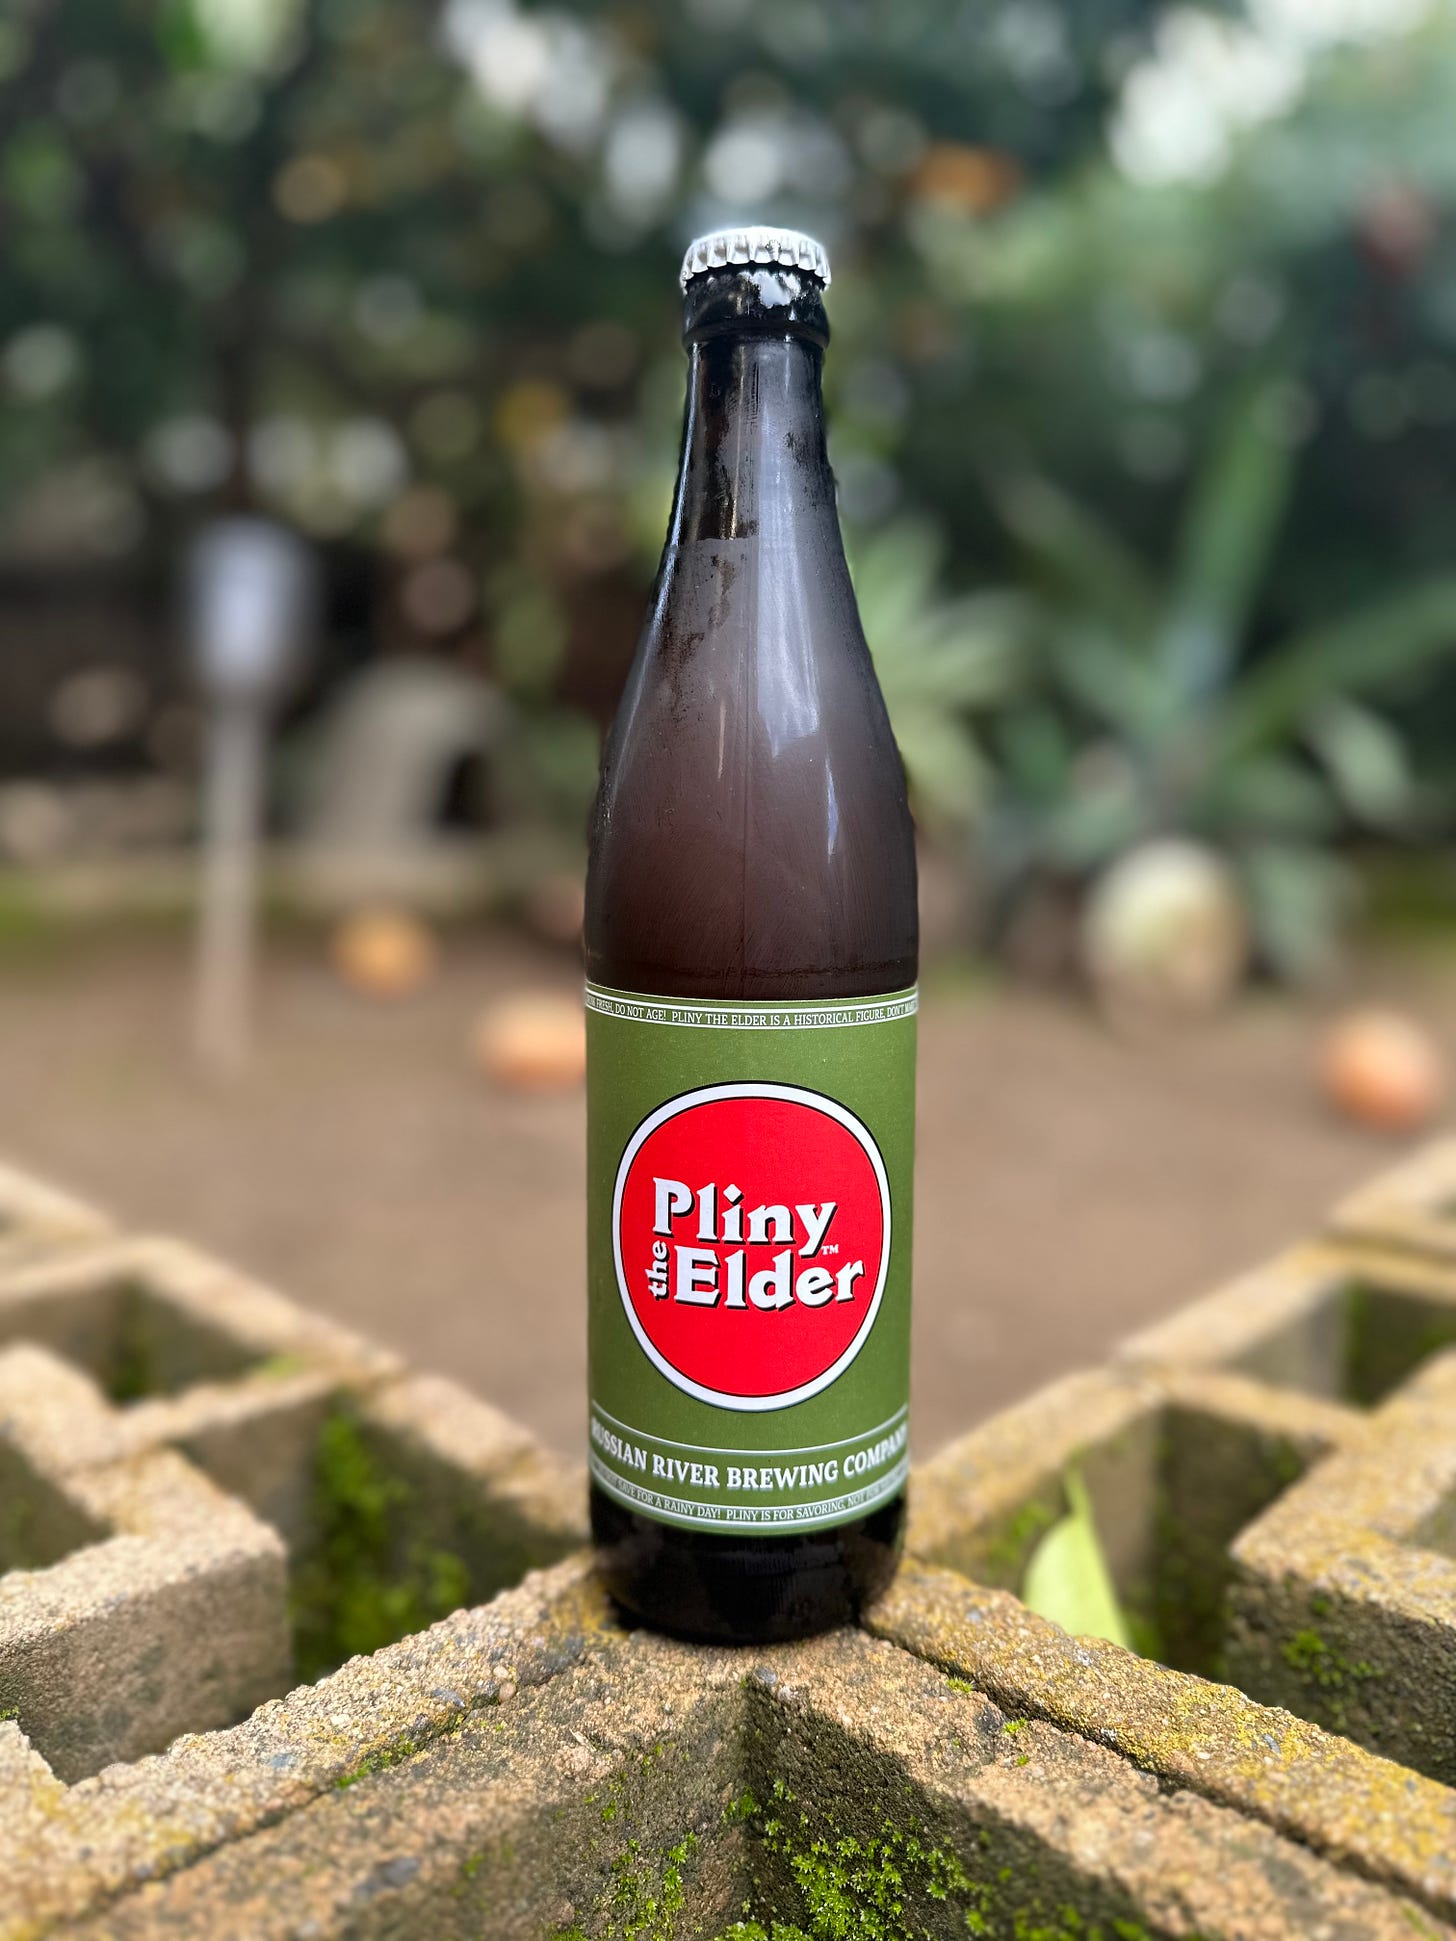 A bottle of Pliny The Elder IPA from Russian River Brewing